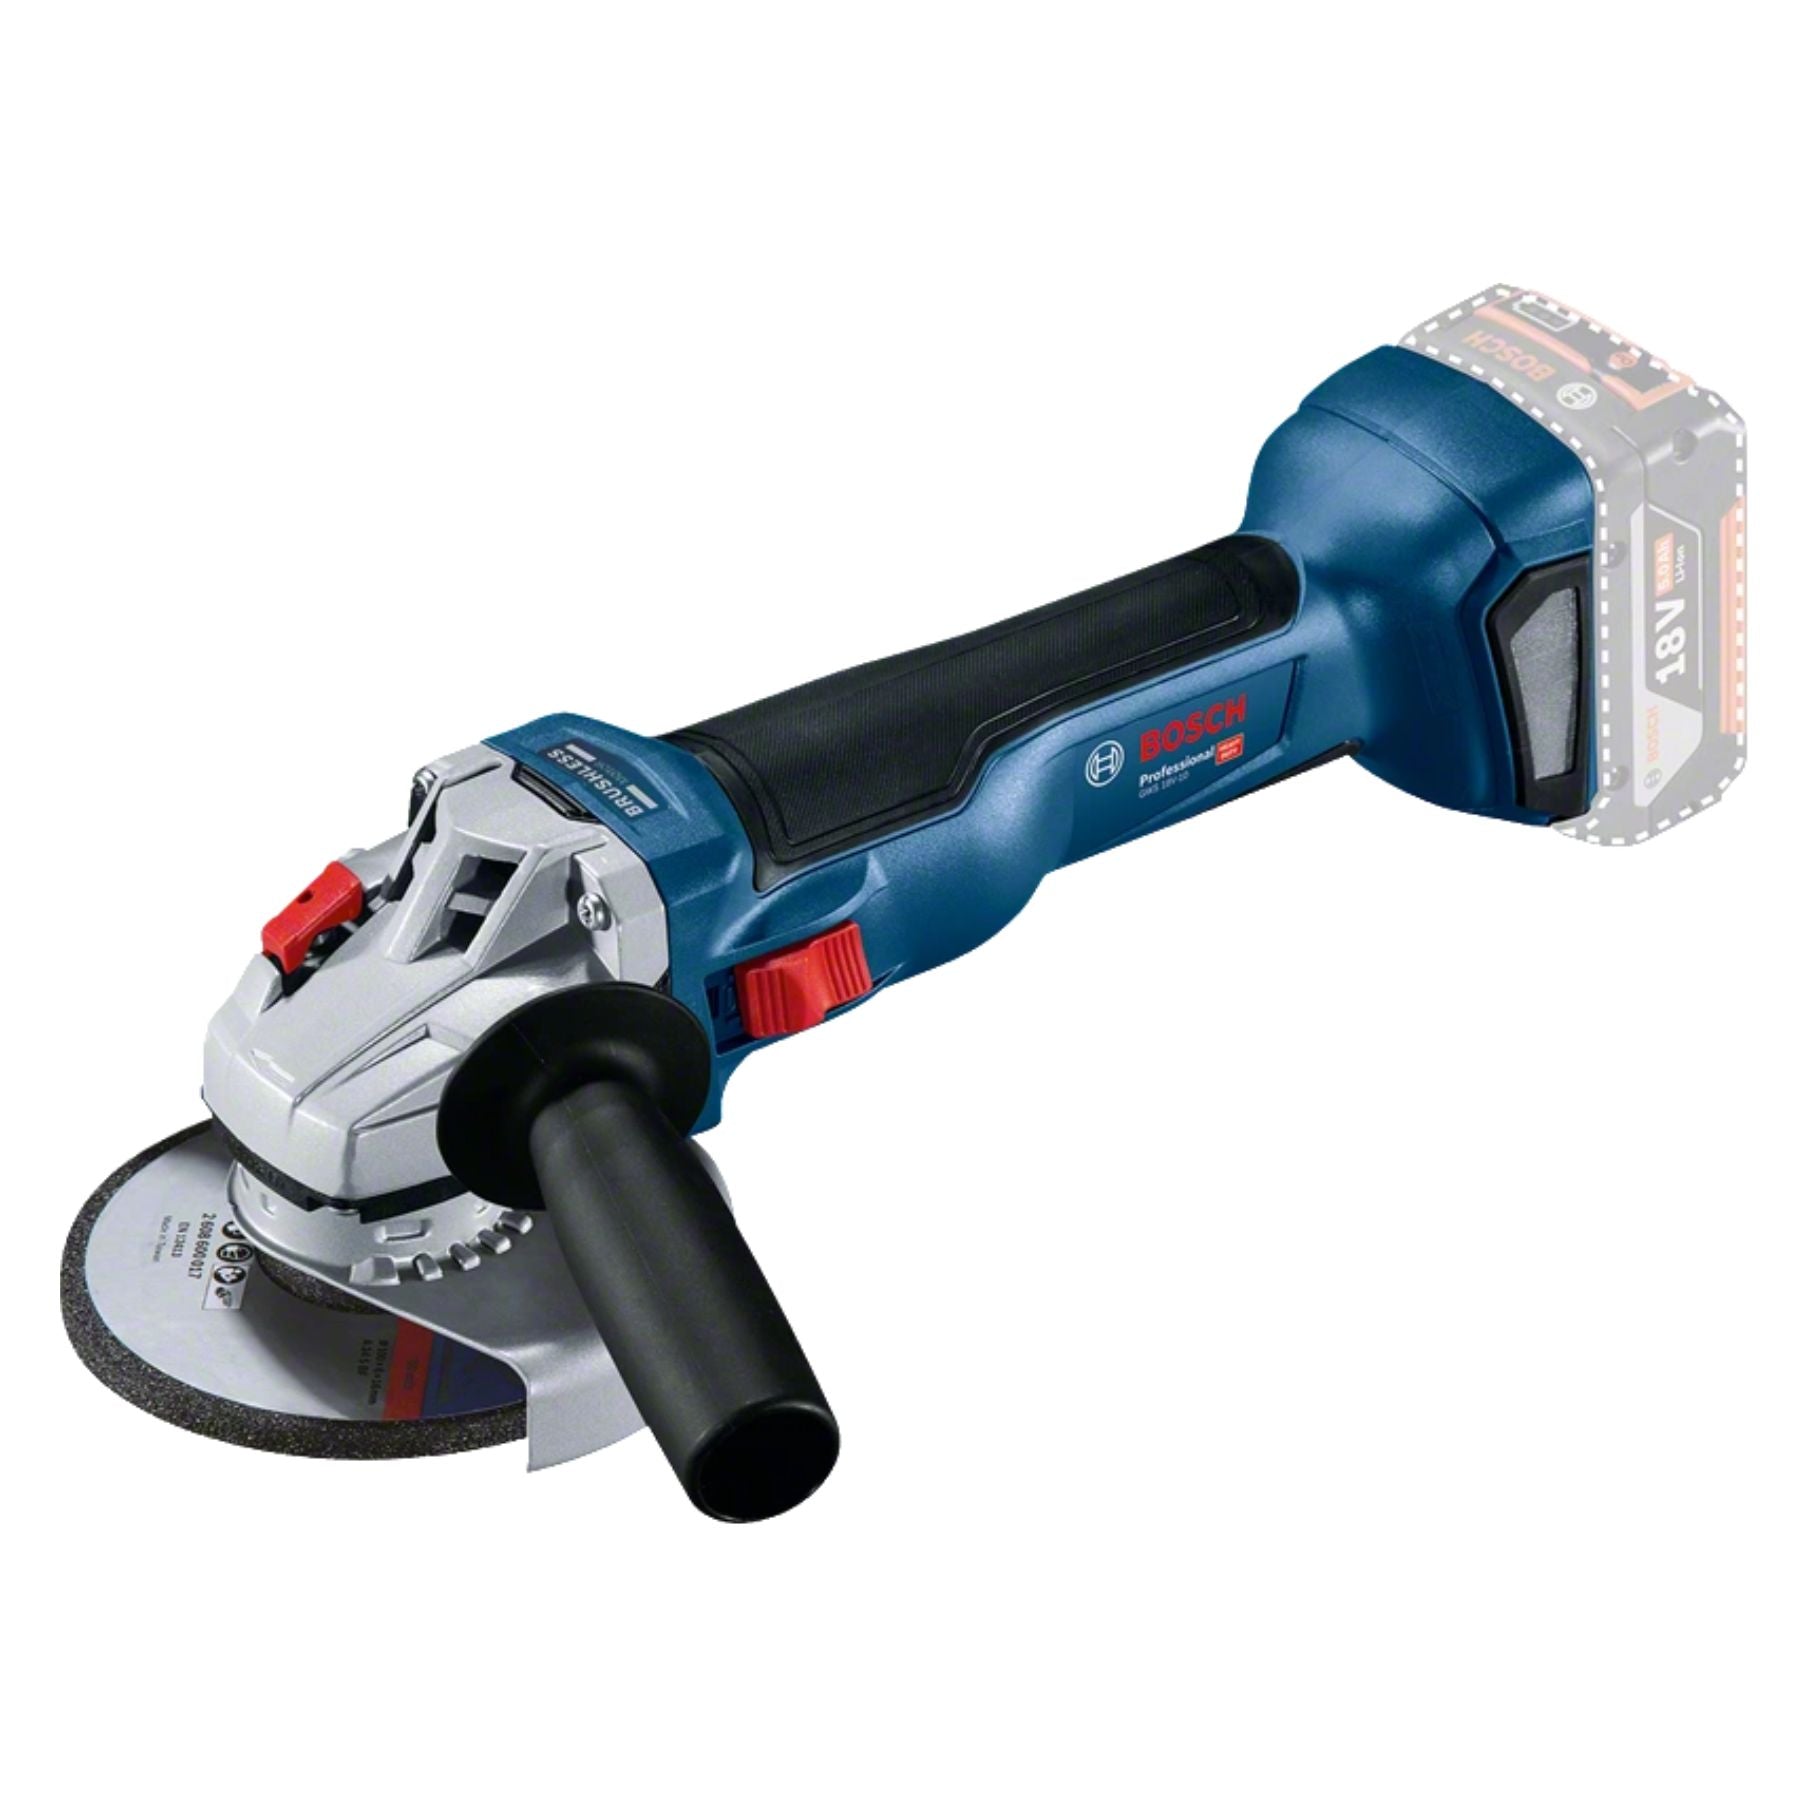 Bosch GWS 18V-10 (125 mm ) (Solo) Cordless Angle Grinder